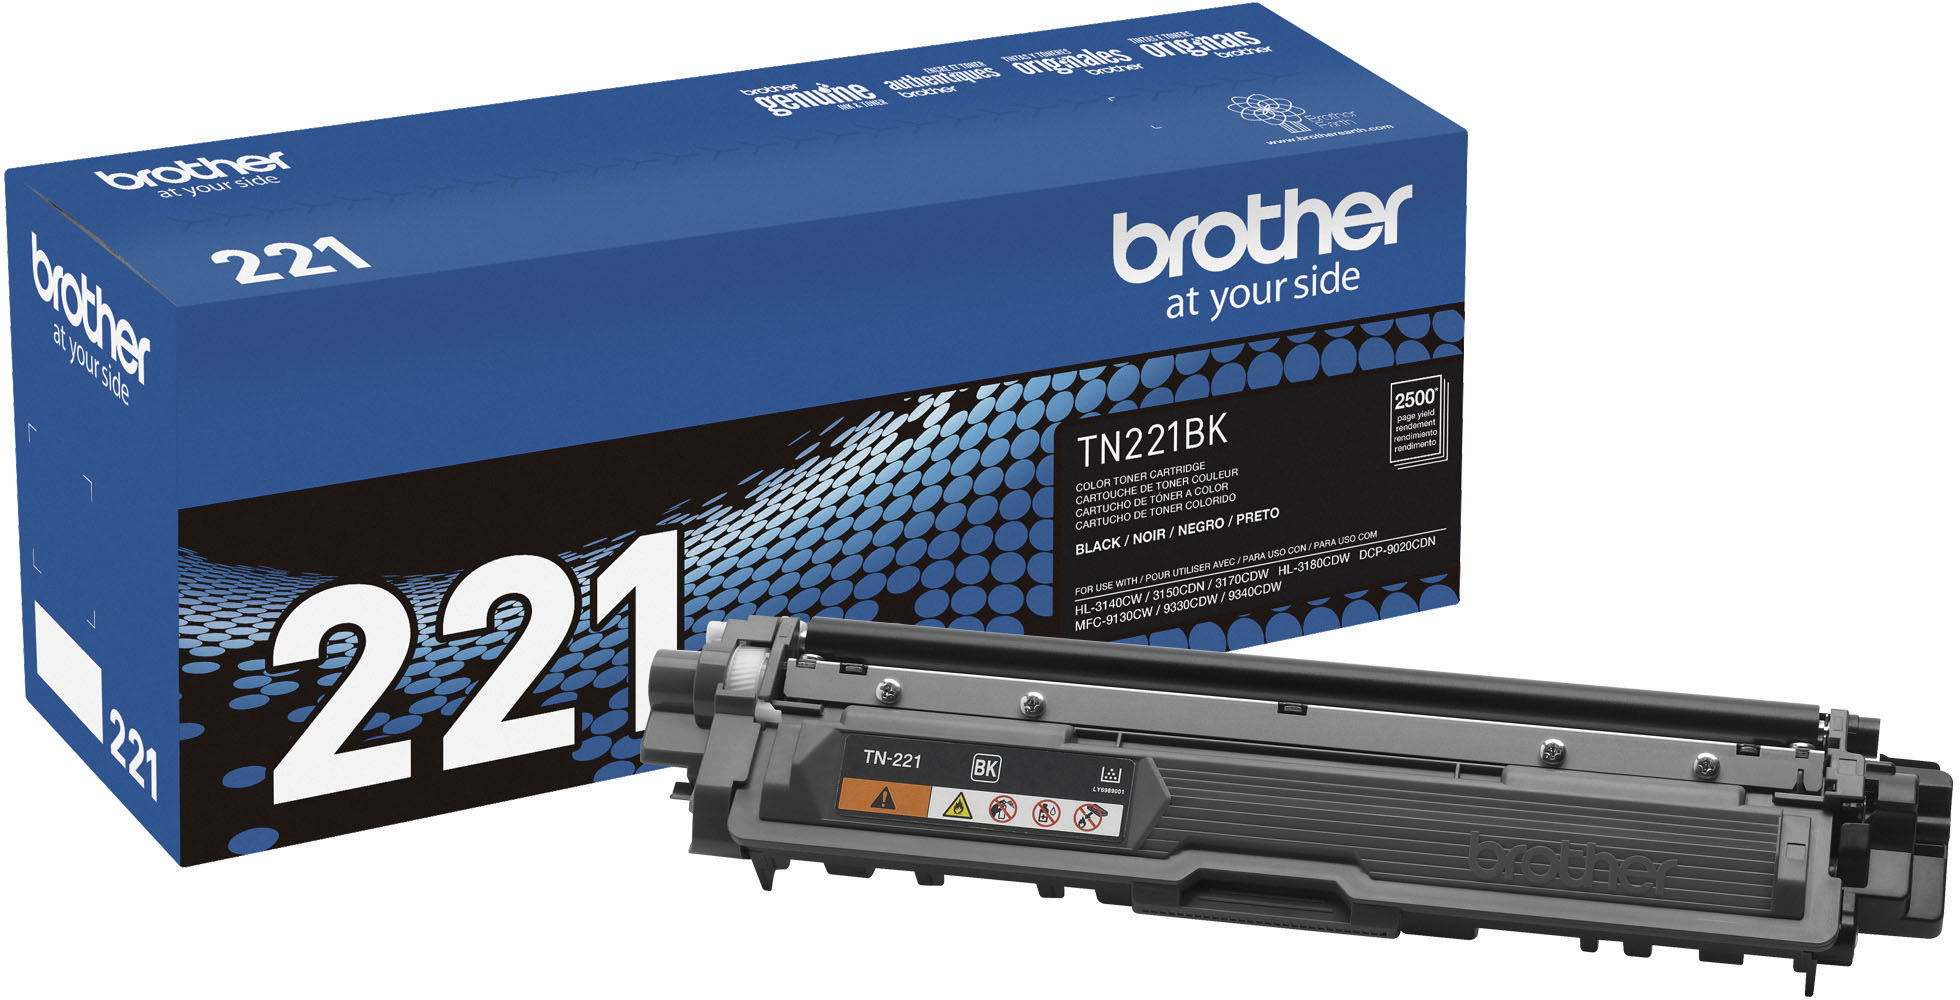 Brother - Brother MFC MultiFunction Printer Toner Cartridges - Brother MFC- 9140CDN - Inkbow